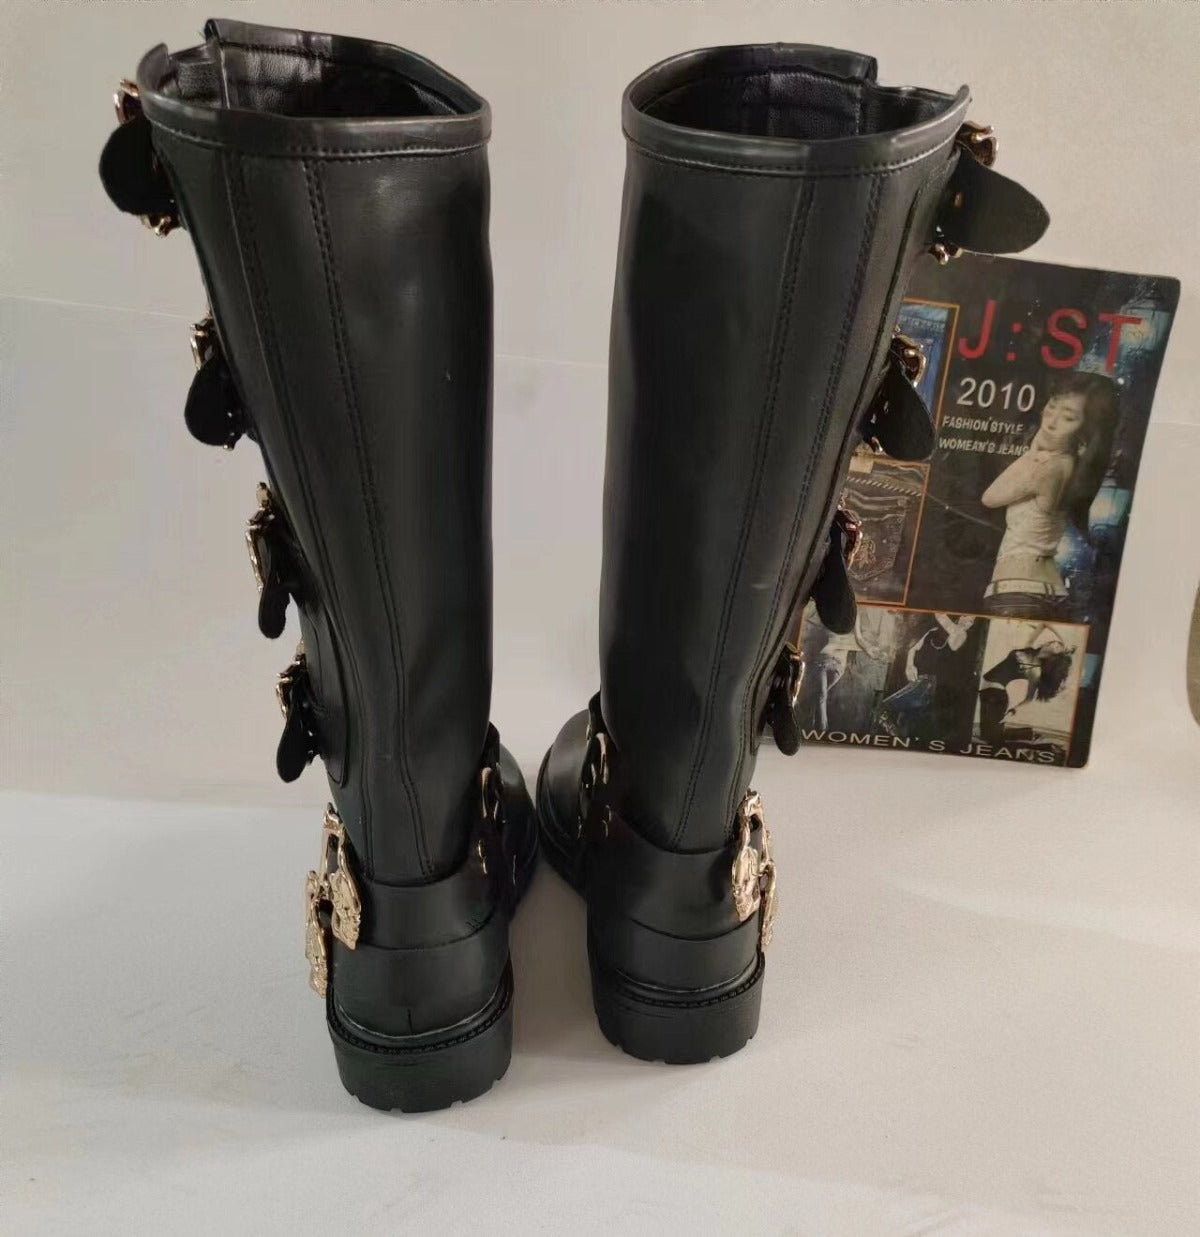 Men's Calf High Motorcycle Riding Boots with Skull Buckles